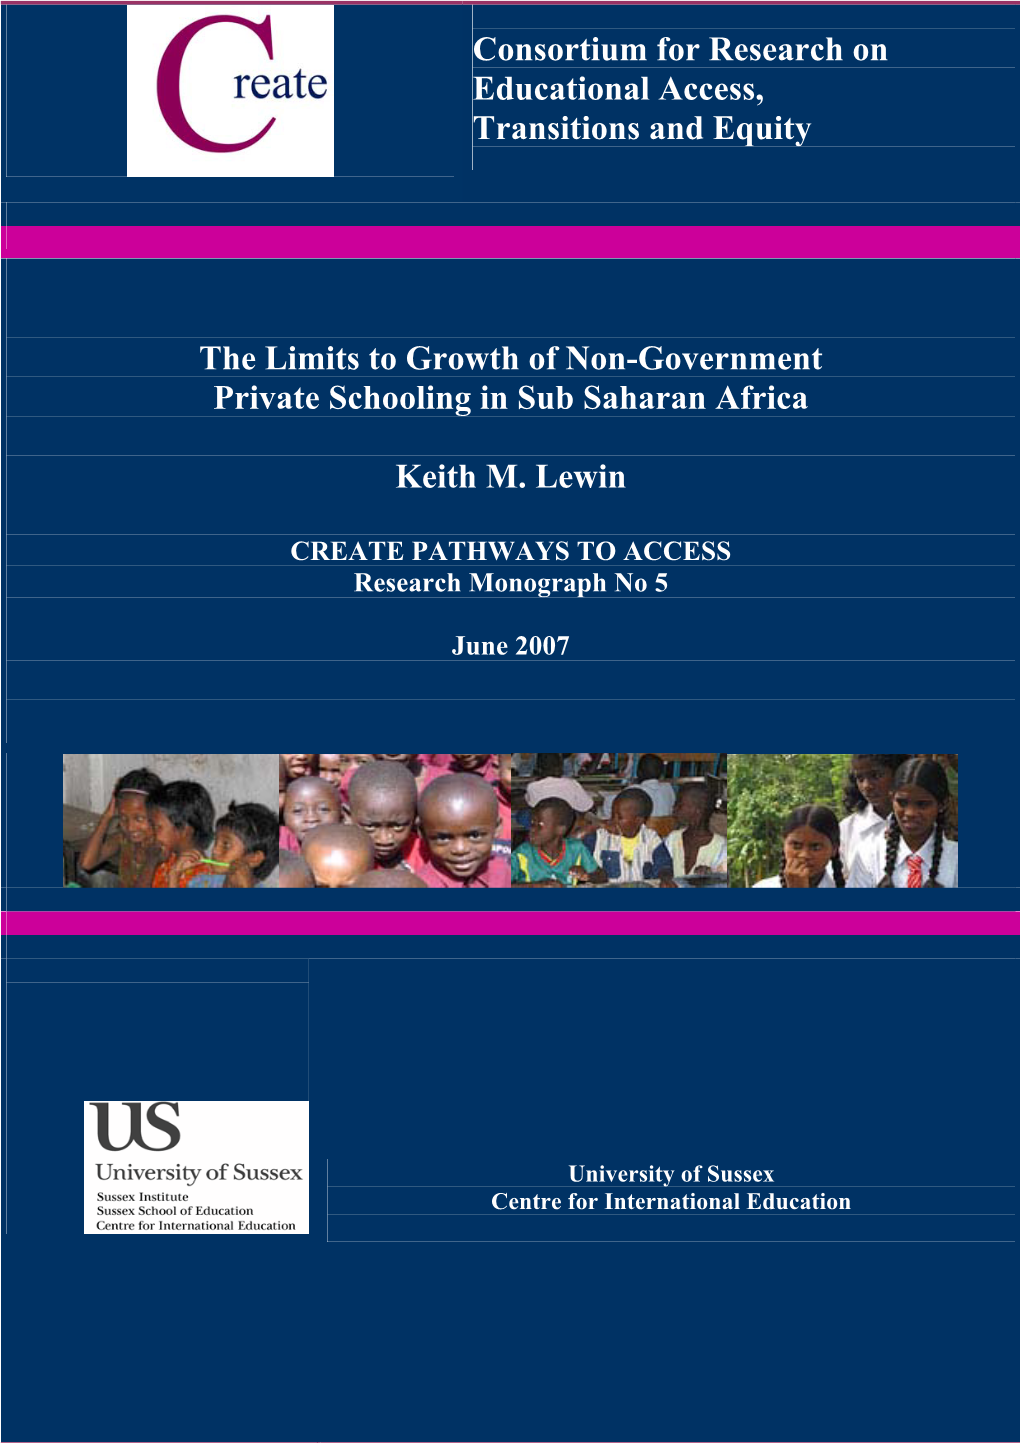 The Limits to Growth of Non-Government Private Schooling in Sub Saharan Africa